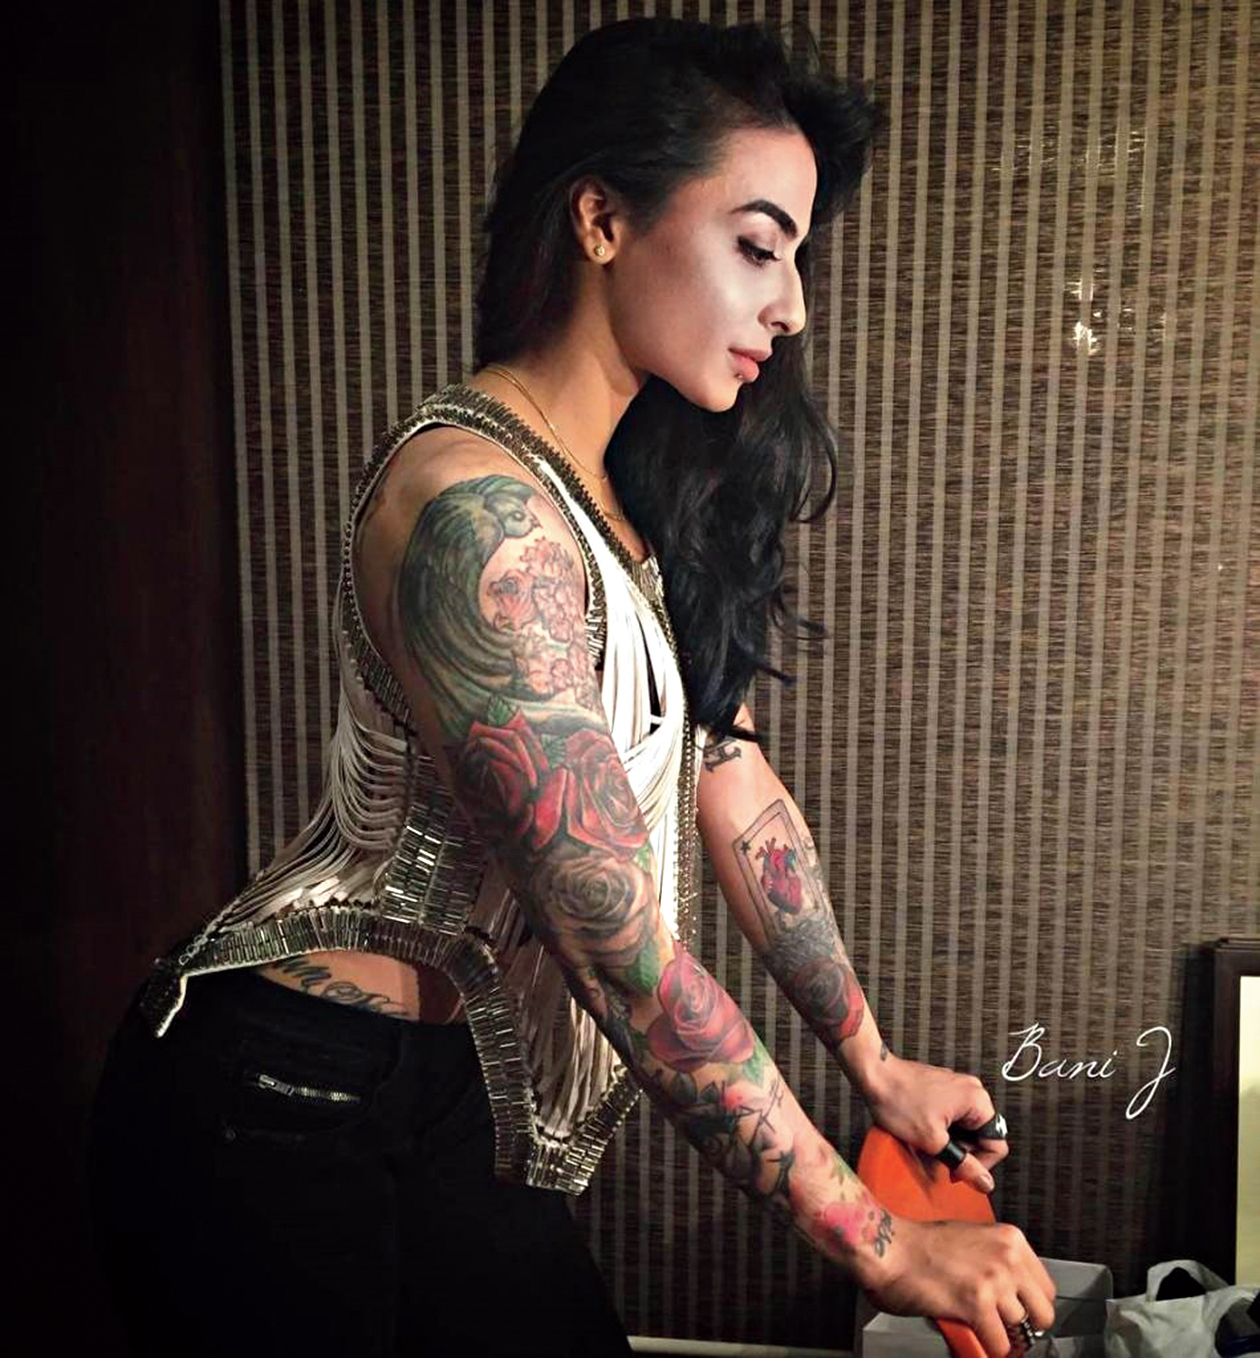 The Secrets Behind Bani J's Toned And Sculpted Body Are These 5 Diet  Essentials | Bani j, Bani judge, Fitness photography